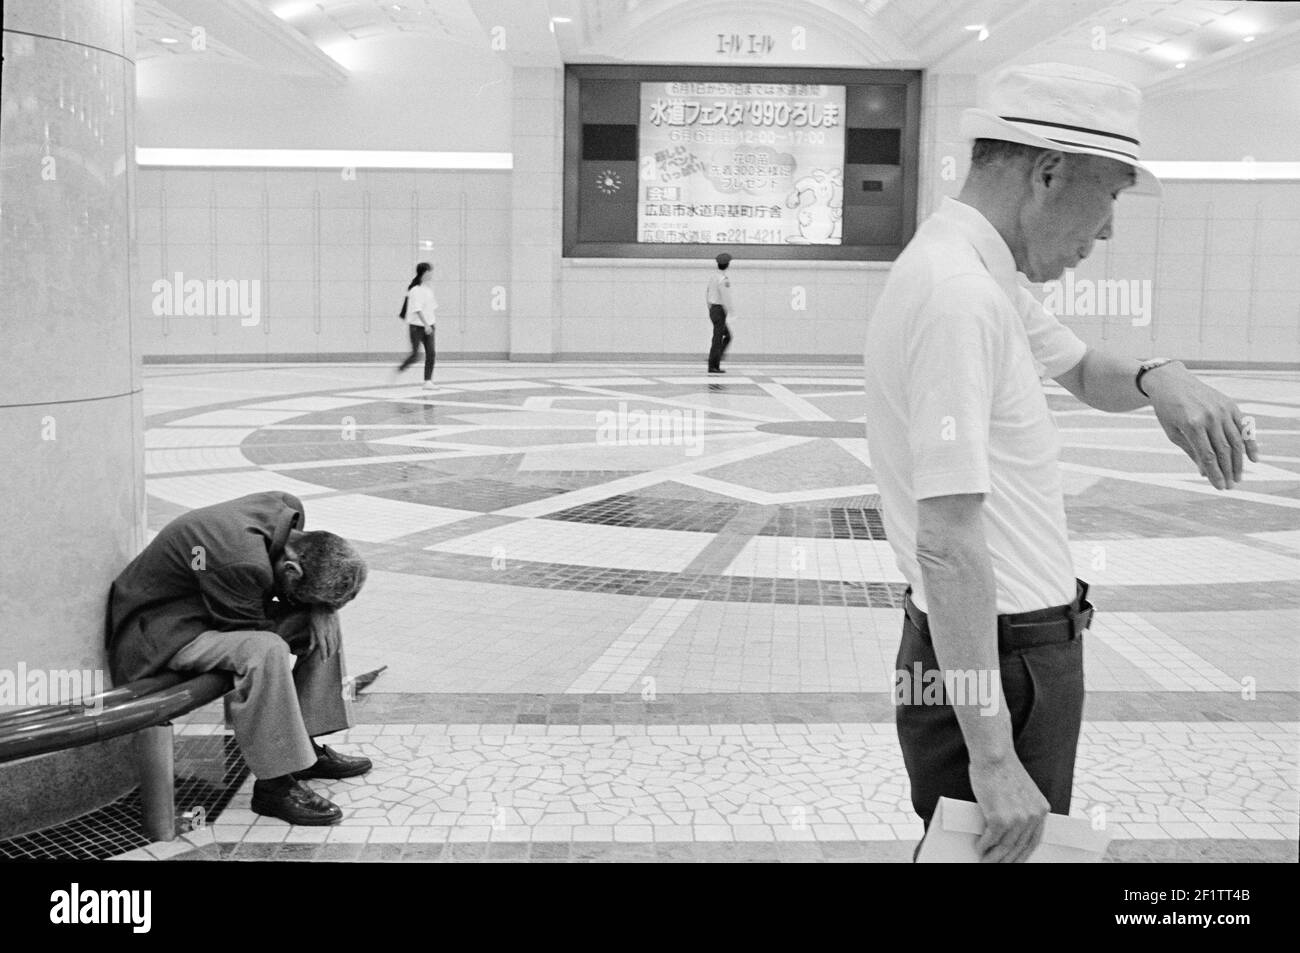 Man checking the time and homeless man sleeping on bench at train station in Tokyo, Japan. Stock Photo